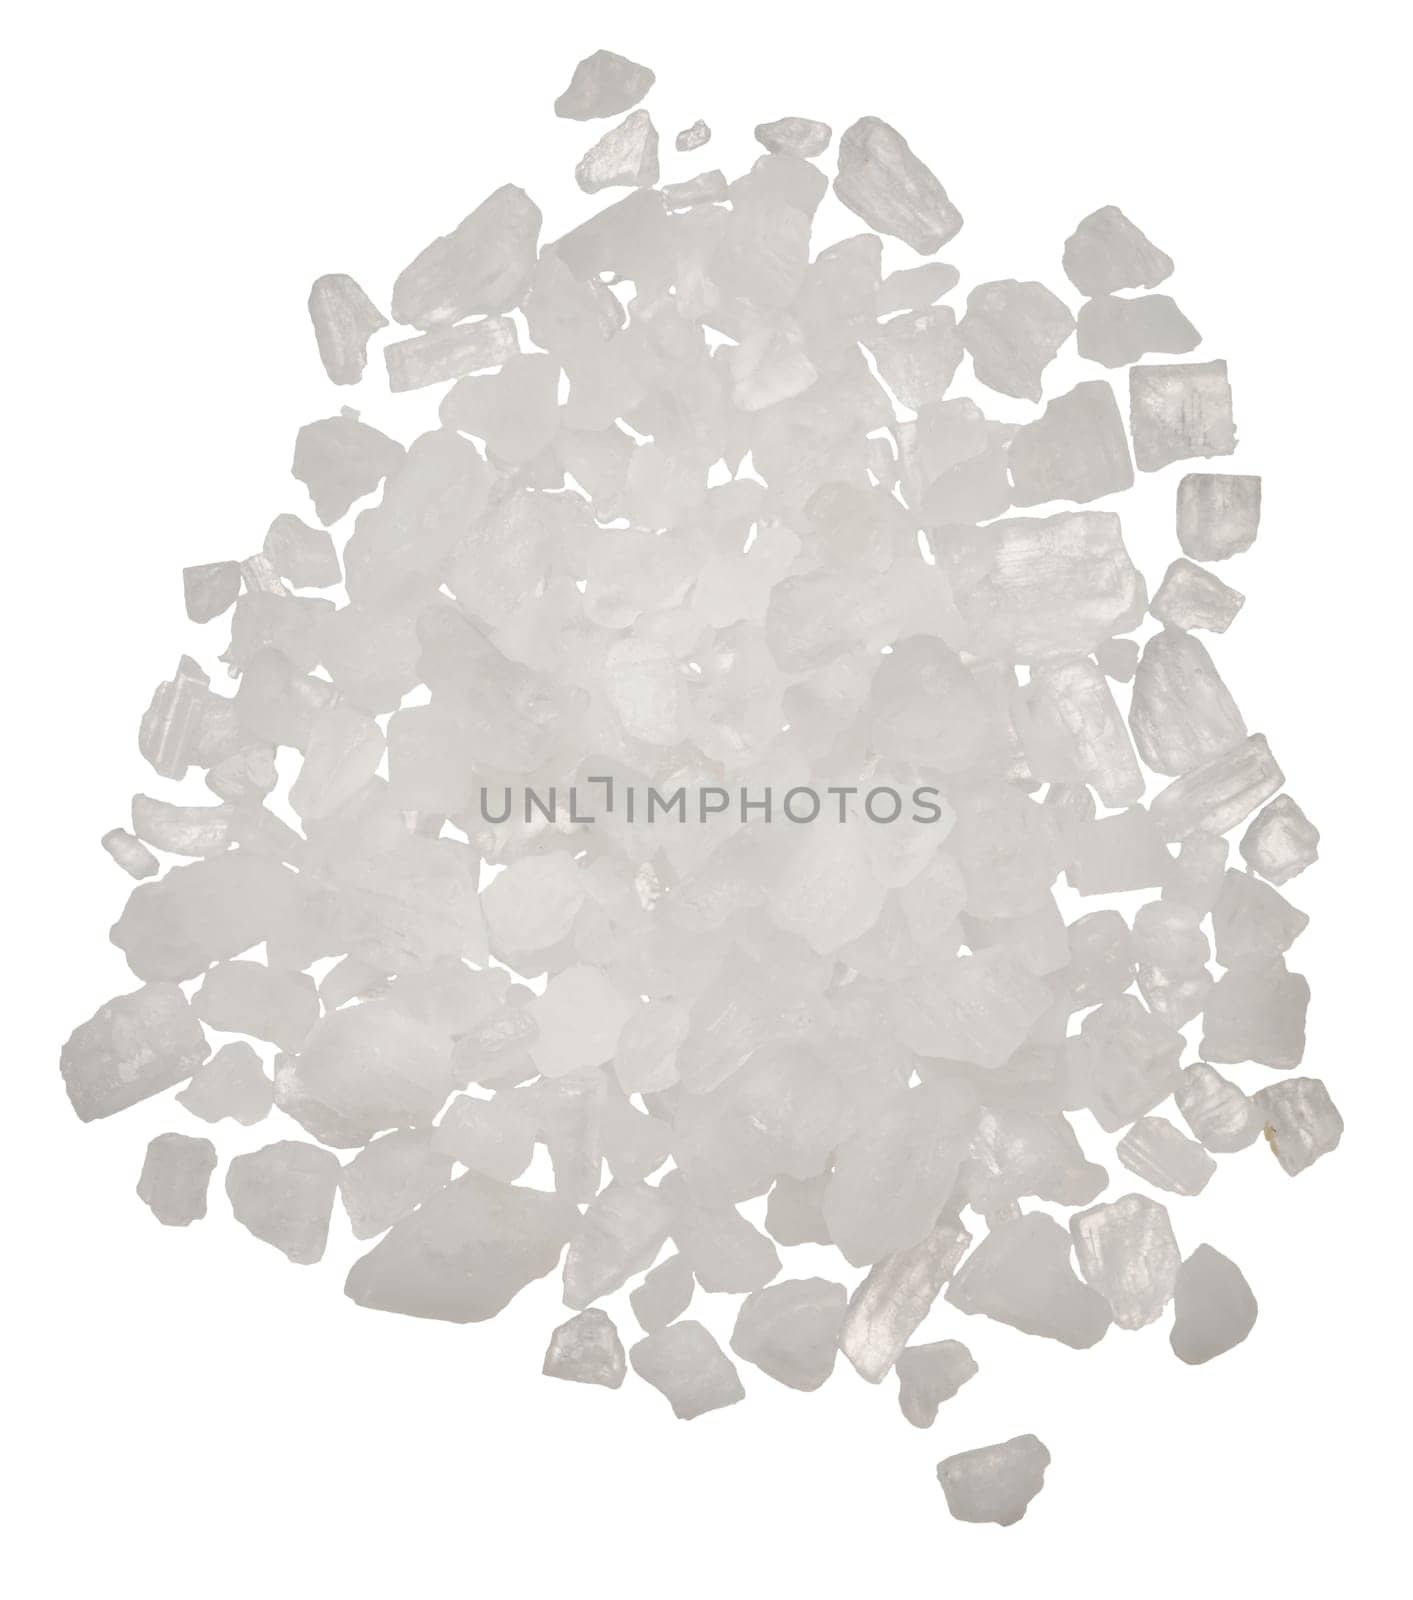 White salt crystals on an isolated background, top view